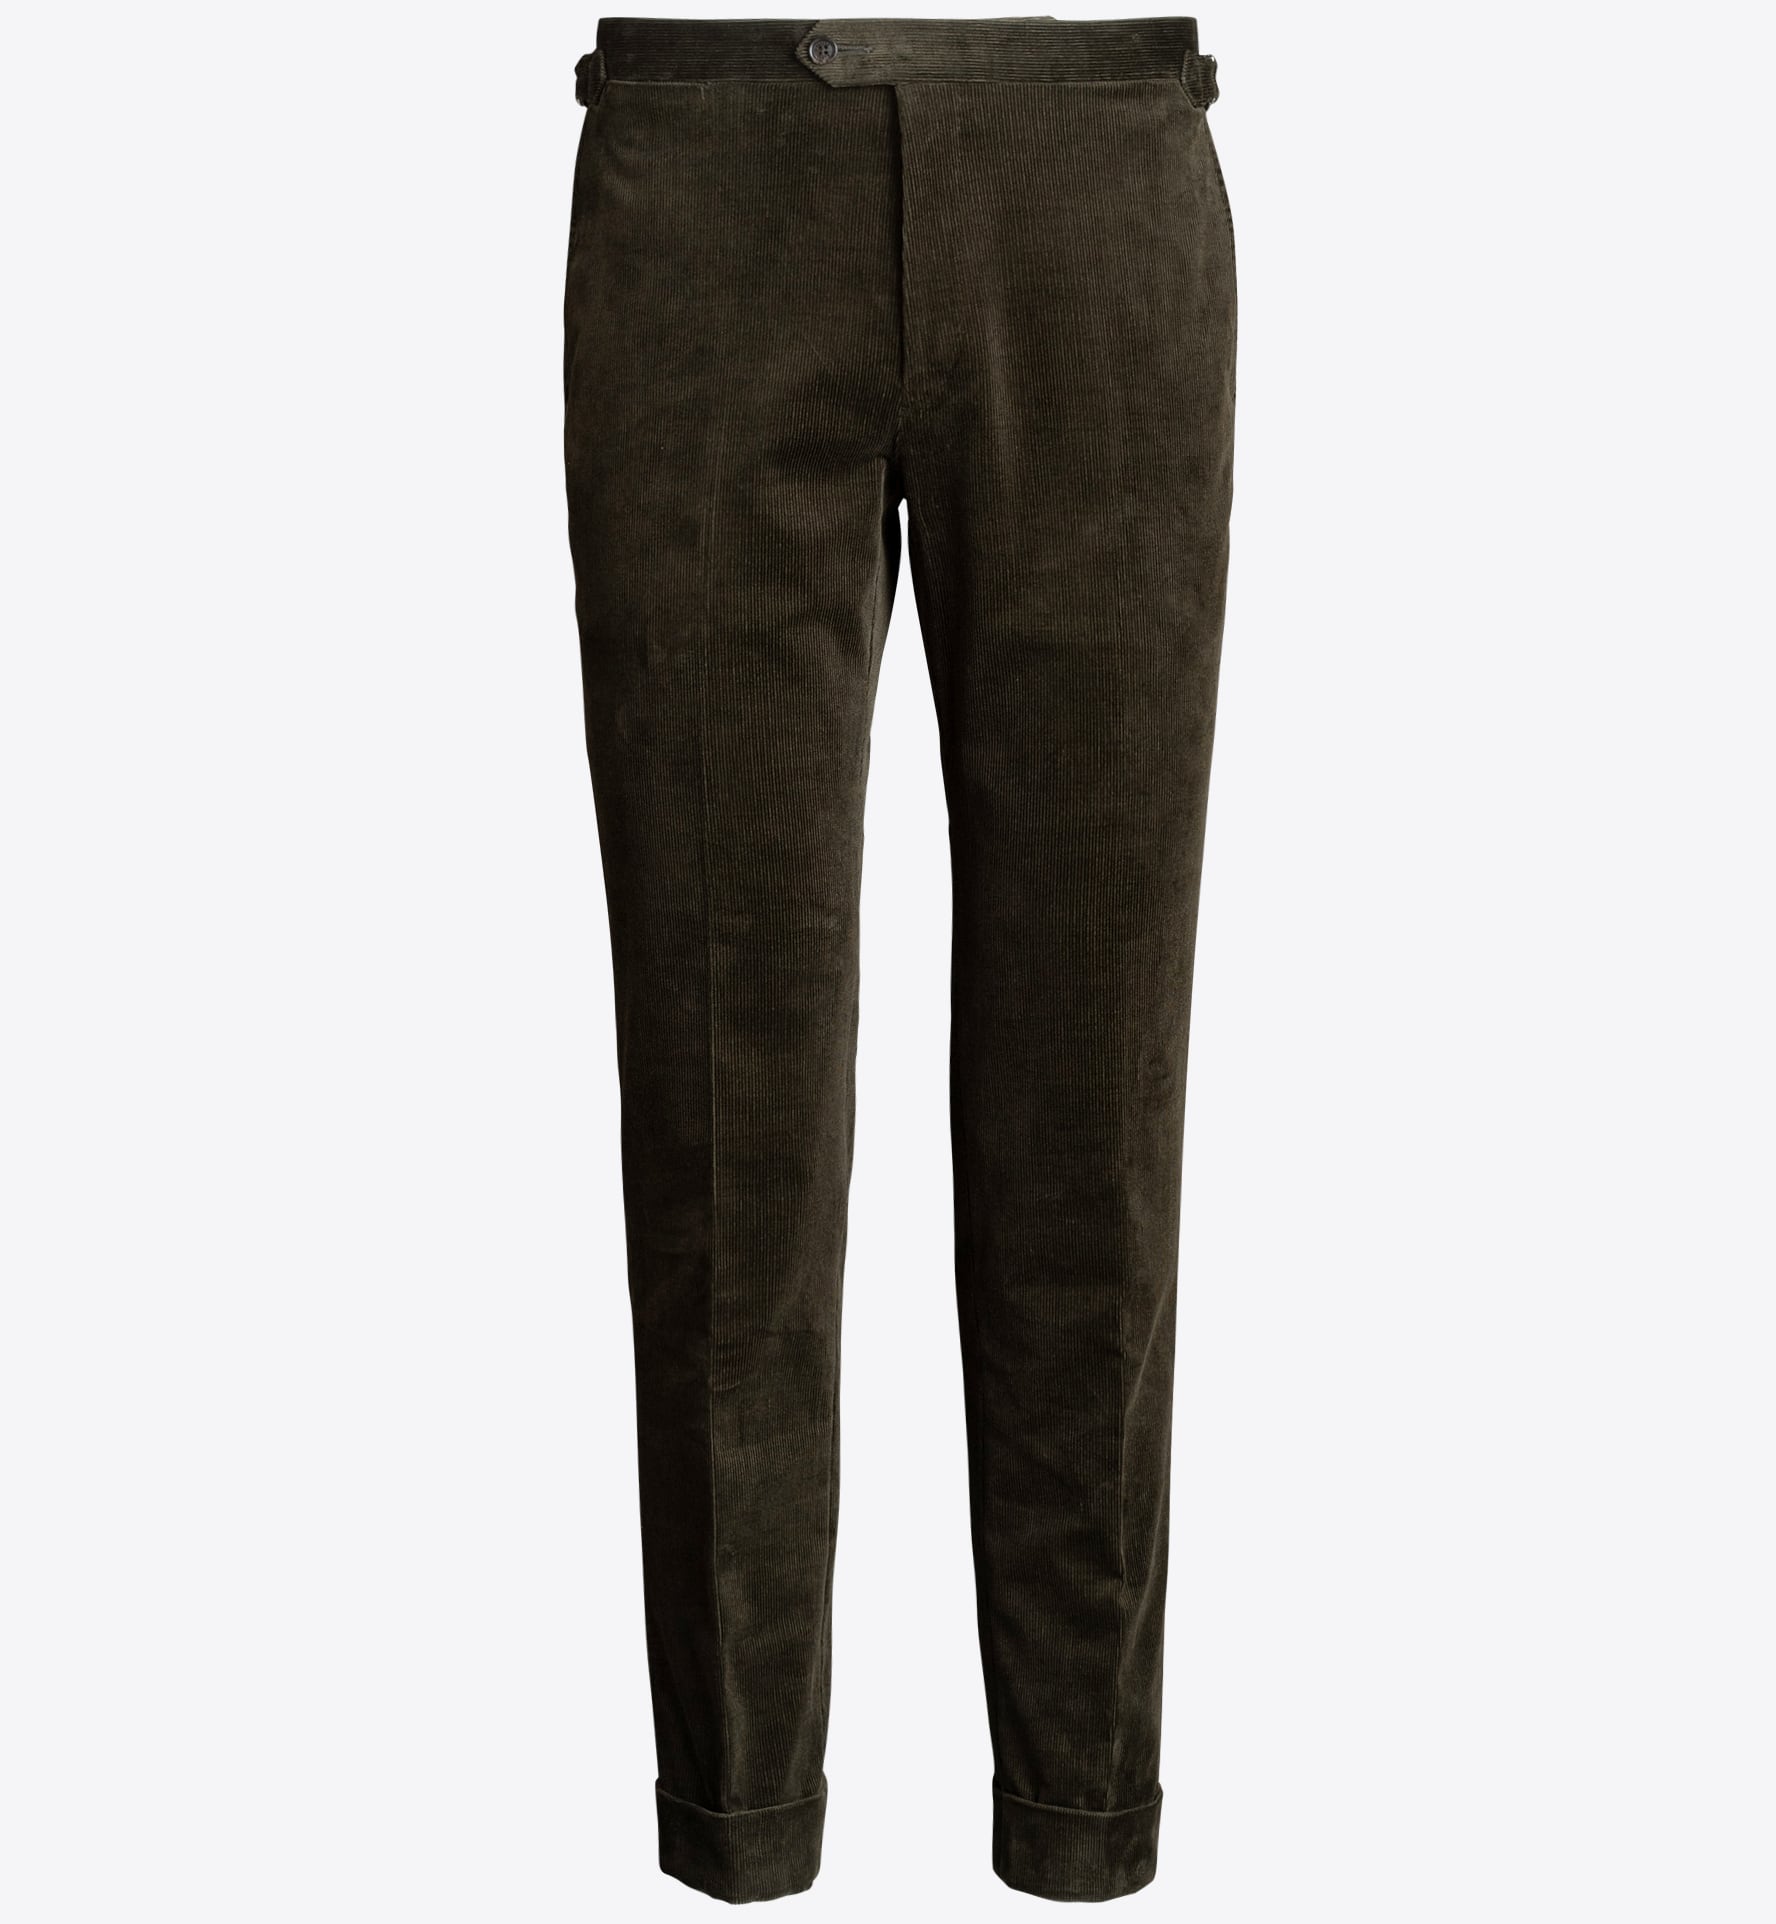 Allen Pine Stretch Corduroy Dress Pant - Custom Fit Tailored Clothing